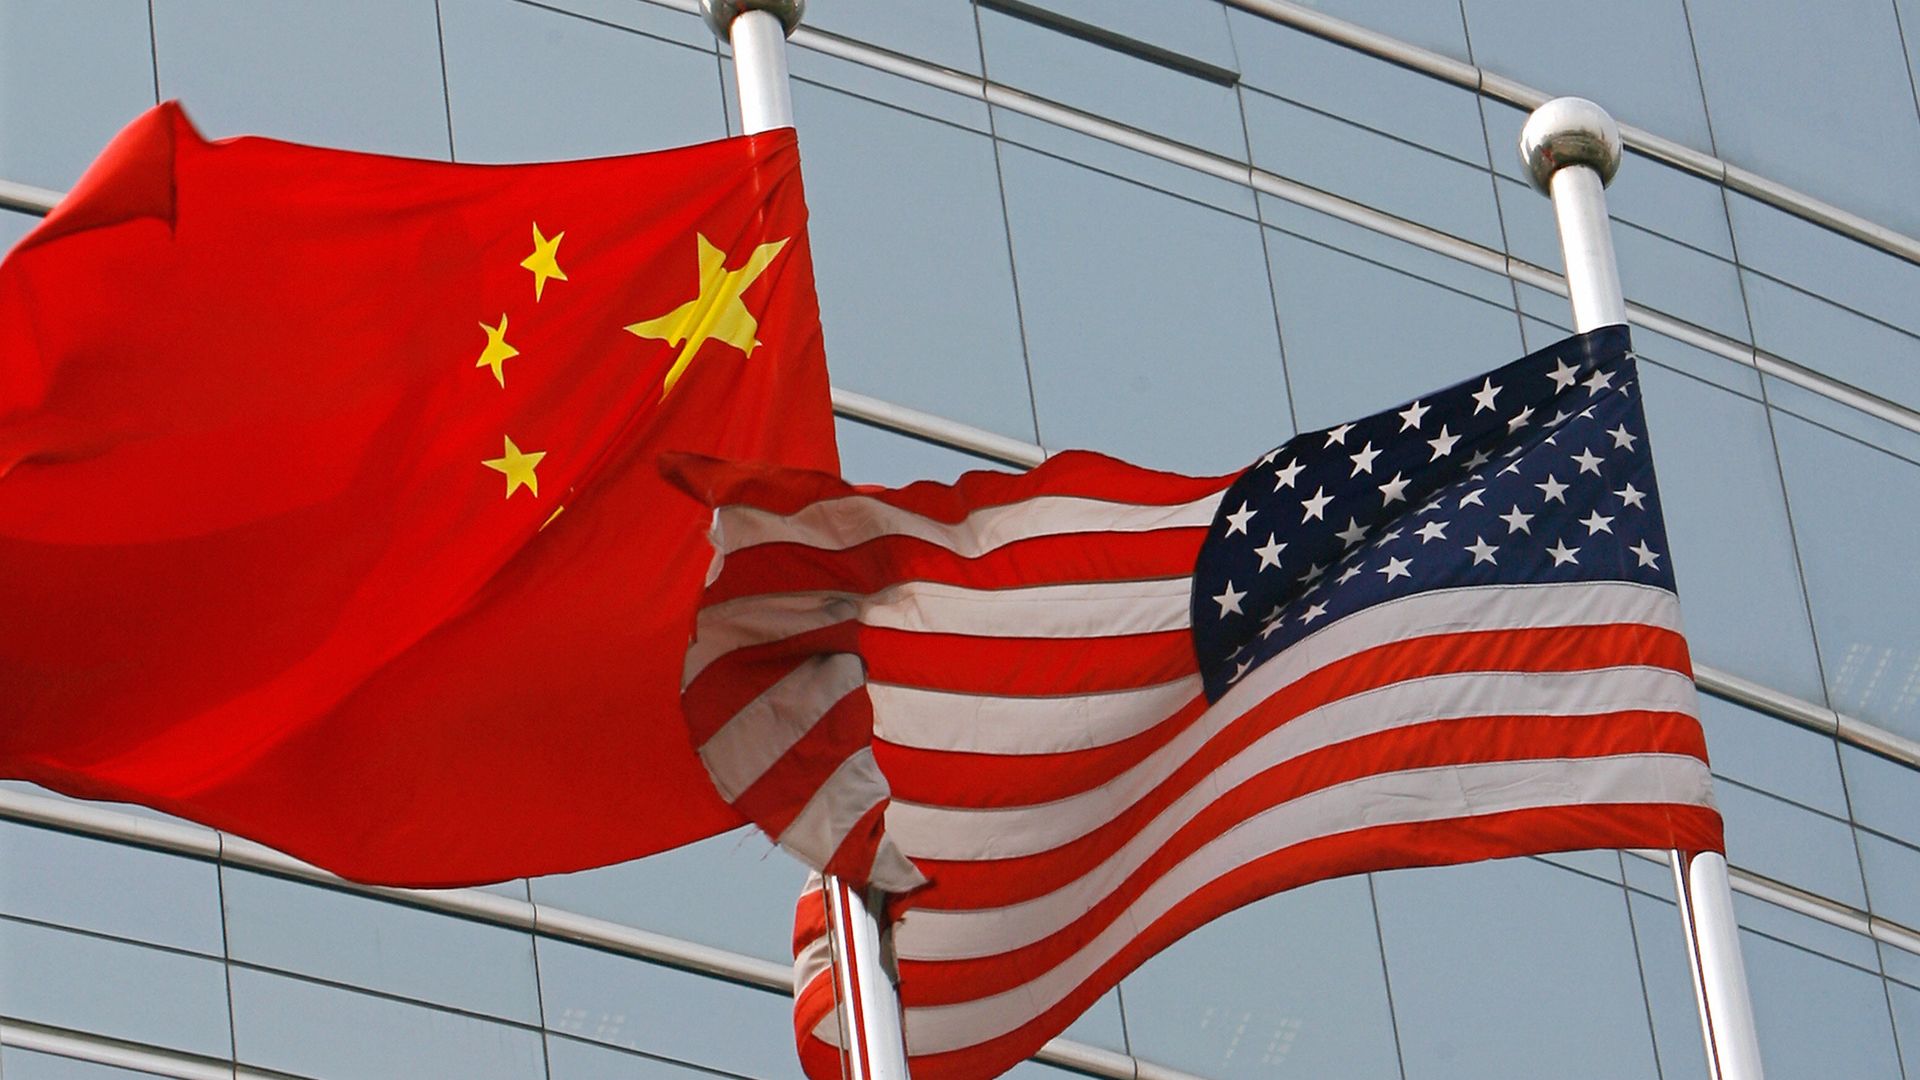 Chinese and American flags waving next to each other